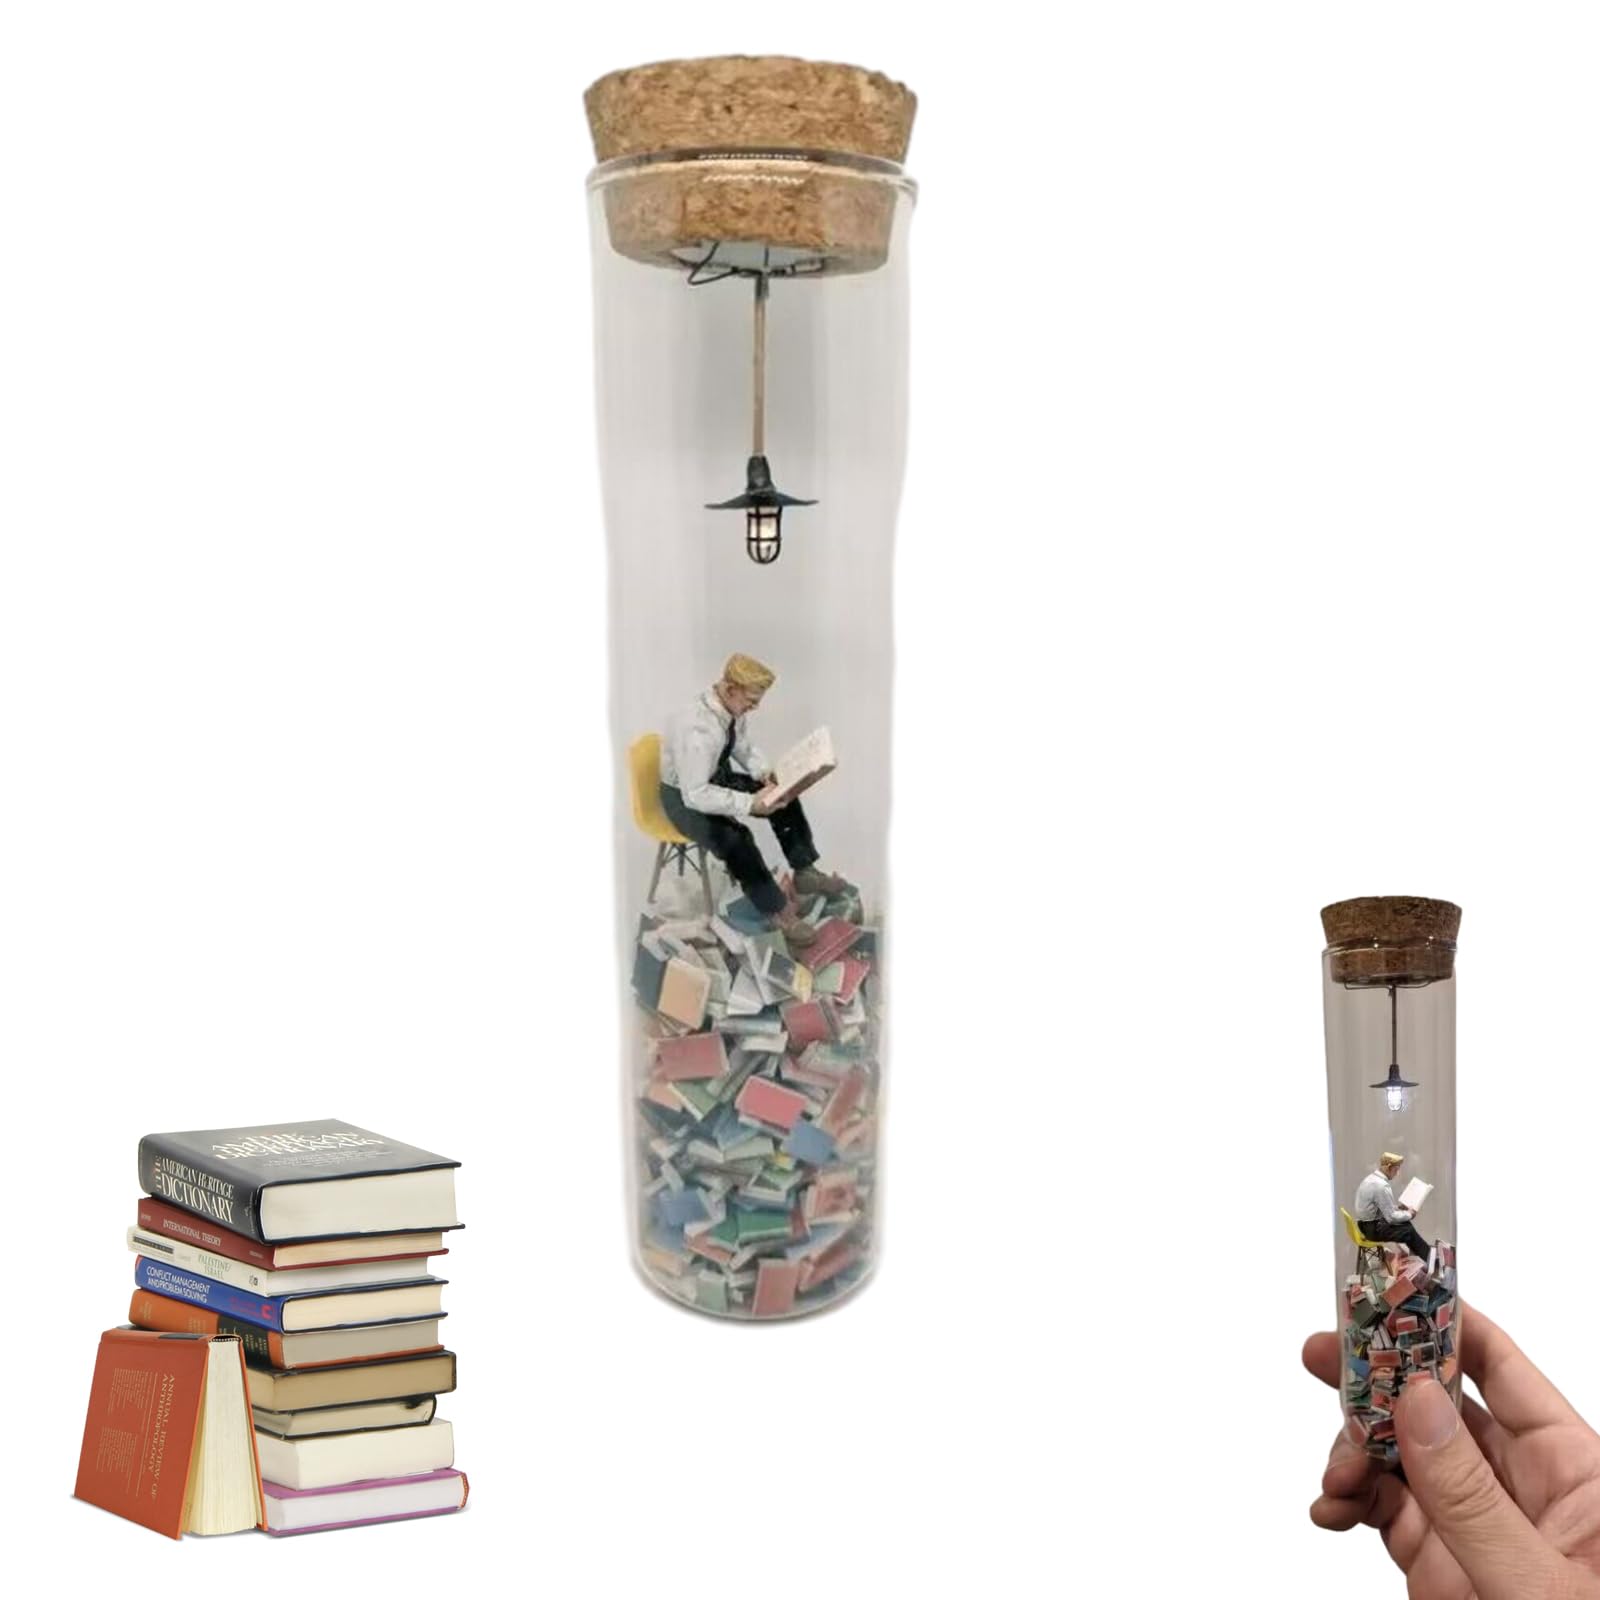 2024 New Test Tube Perspective Drawing, Test Tube Diorama, Test Tube Micro Scene Fandicraft Ornaments, Fun Sci-fi Books to Decorate Test Tubes, Wonderful Gifts for Loved Ones (1PCS)